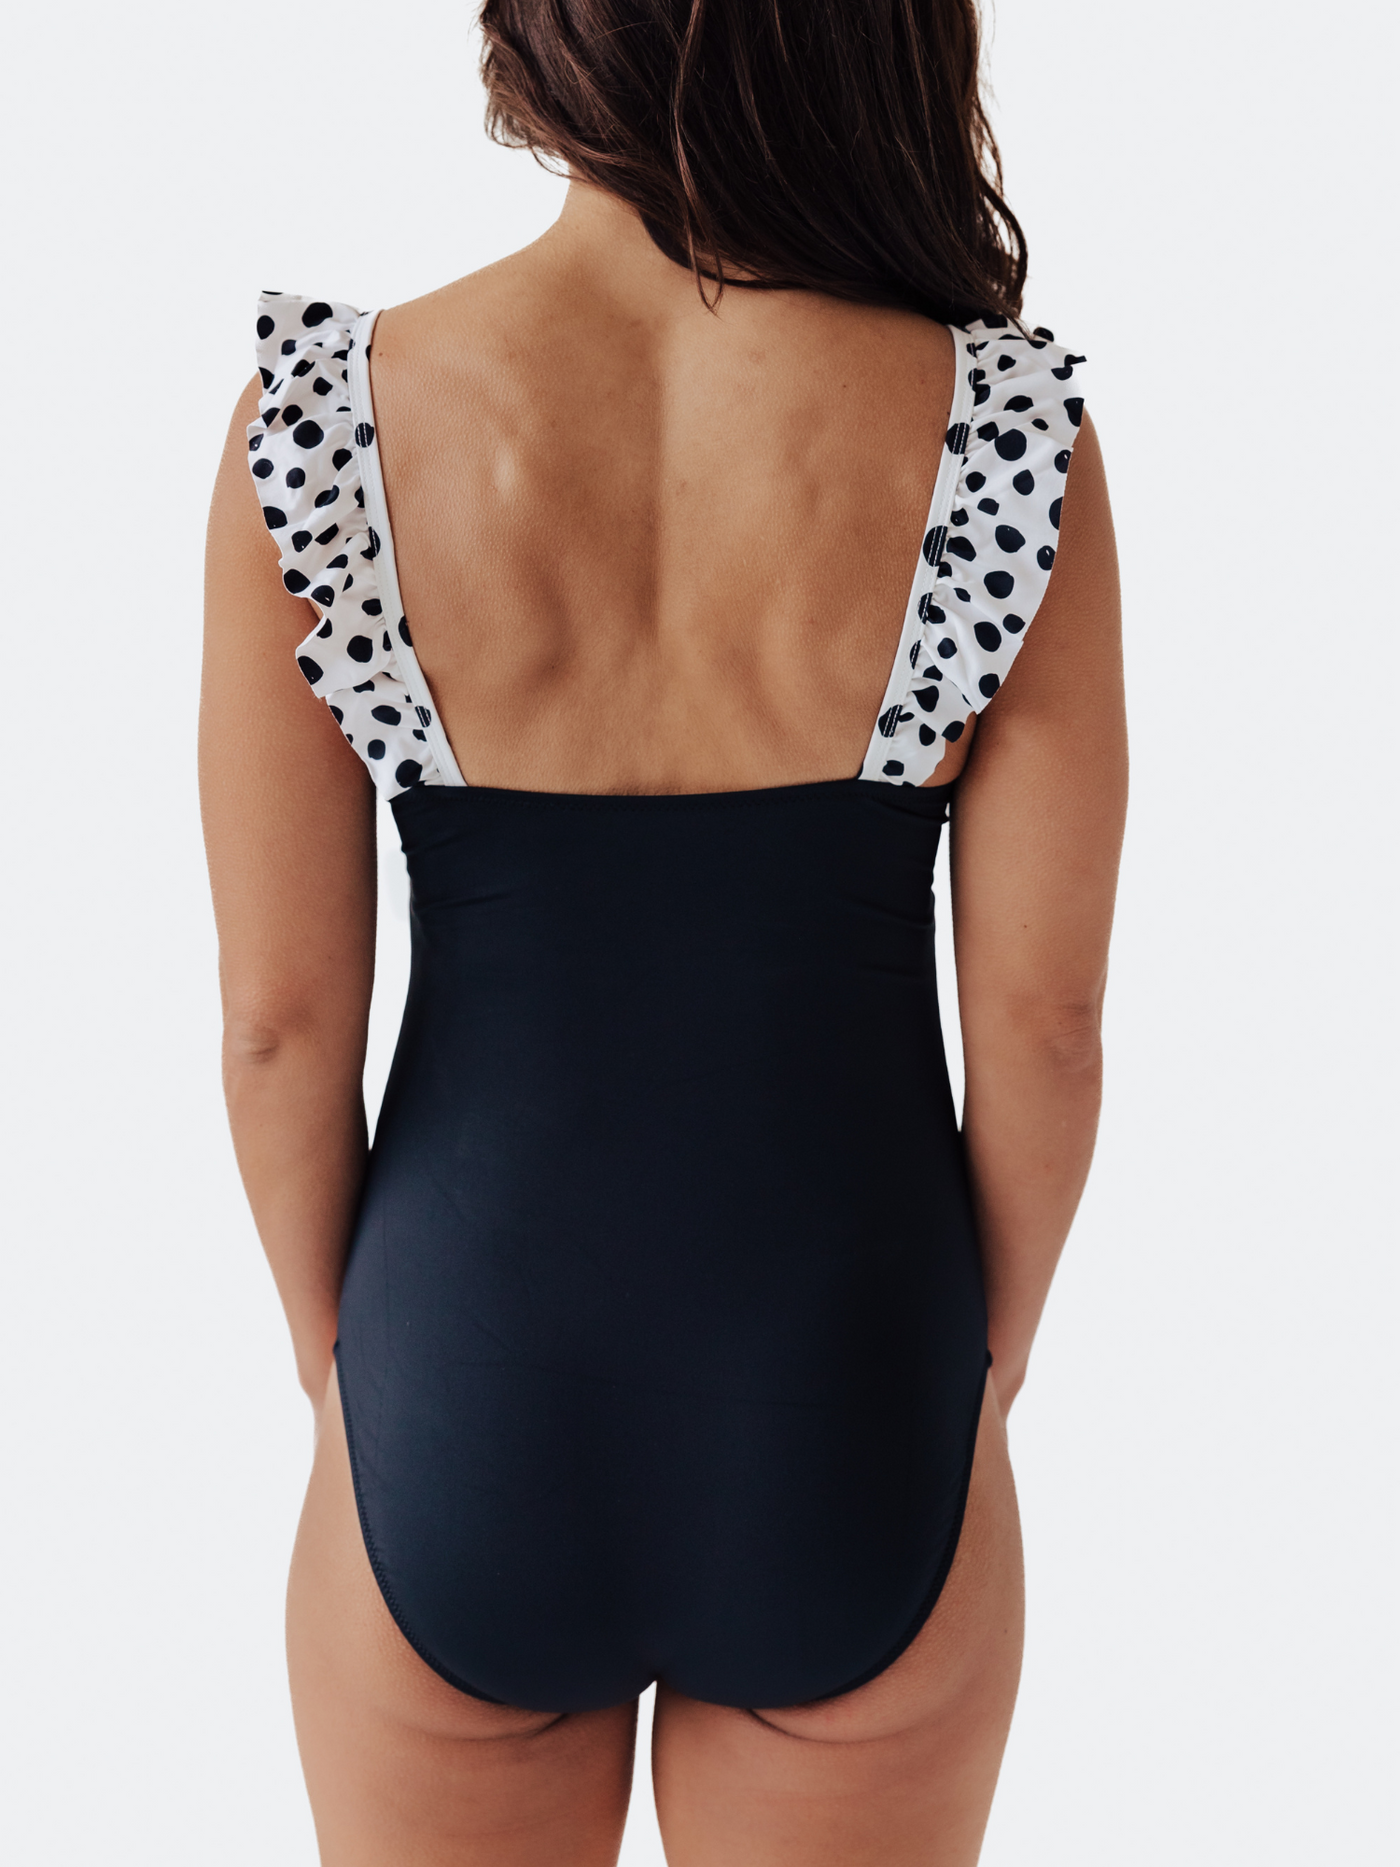 Full-coverage back view of our one-piece swimsuit with playful polka dots. Double-lined for comfort and support. Shop the "Dalmatians on Vacation" collection at navalora.com.